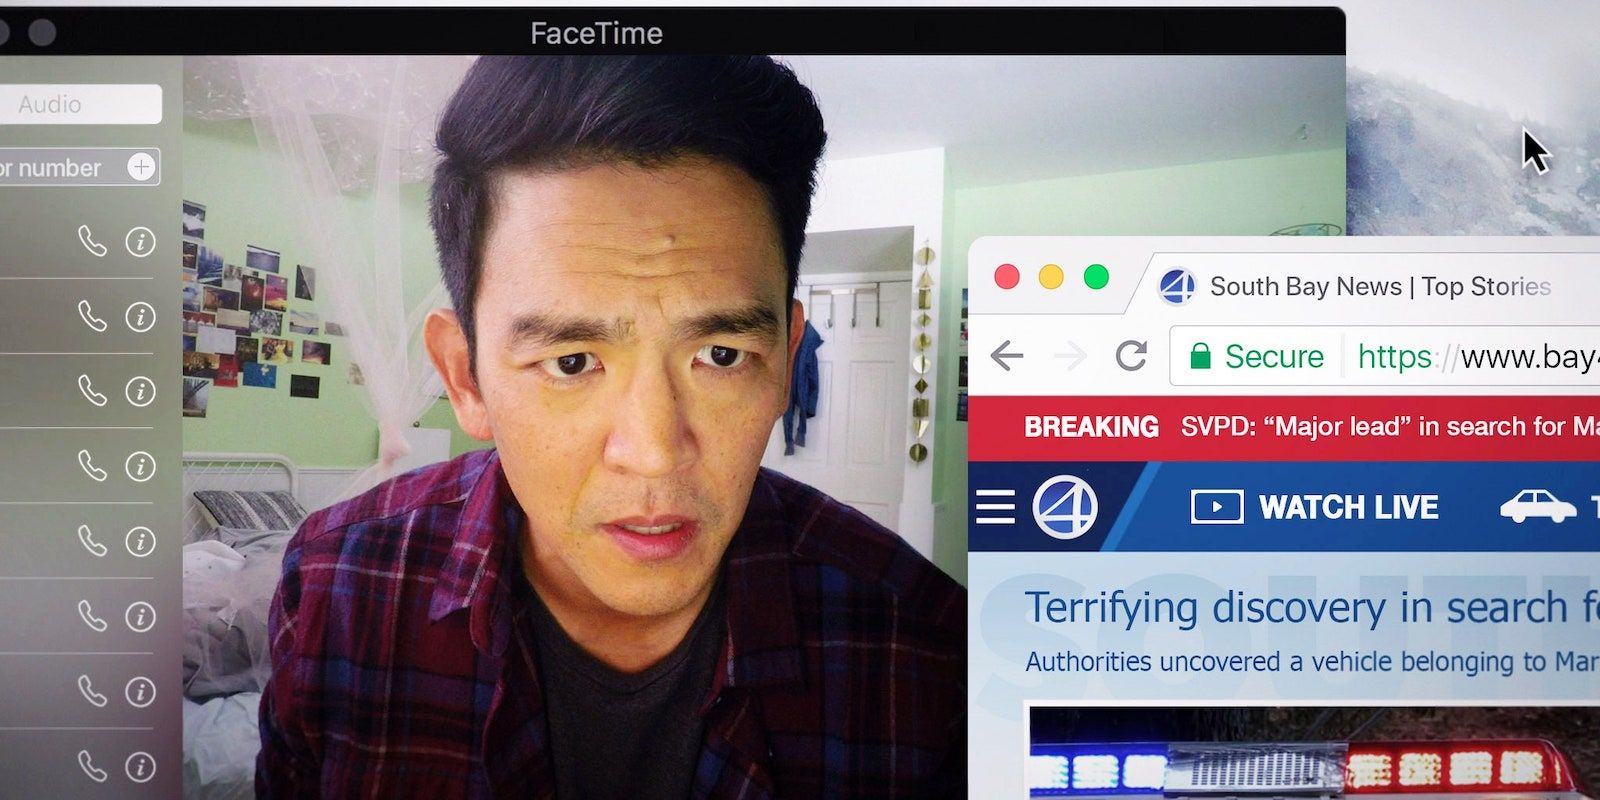 Searching with John Cho